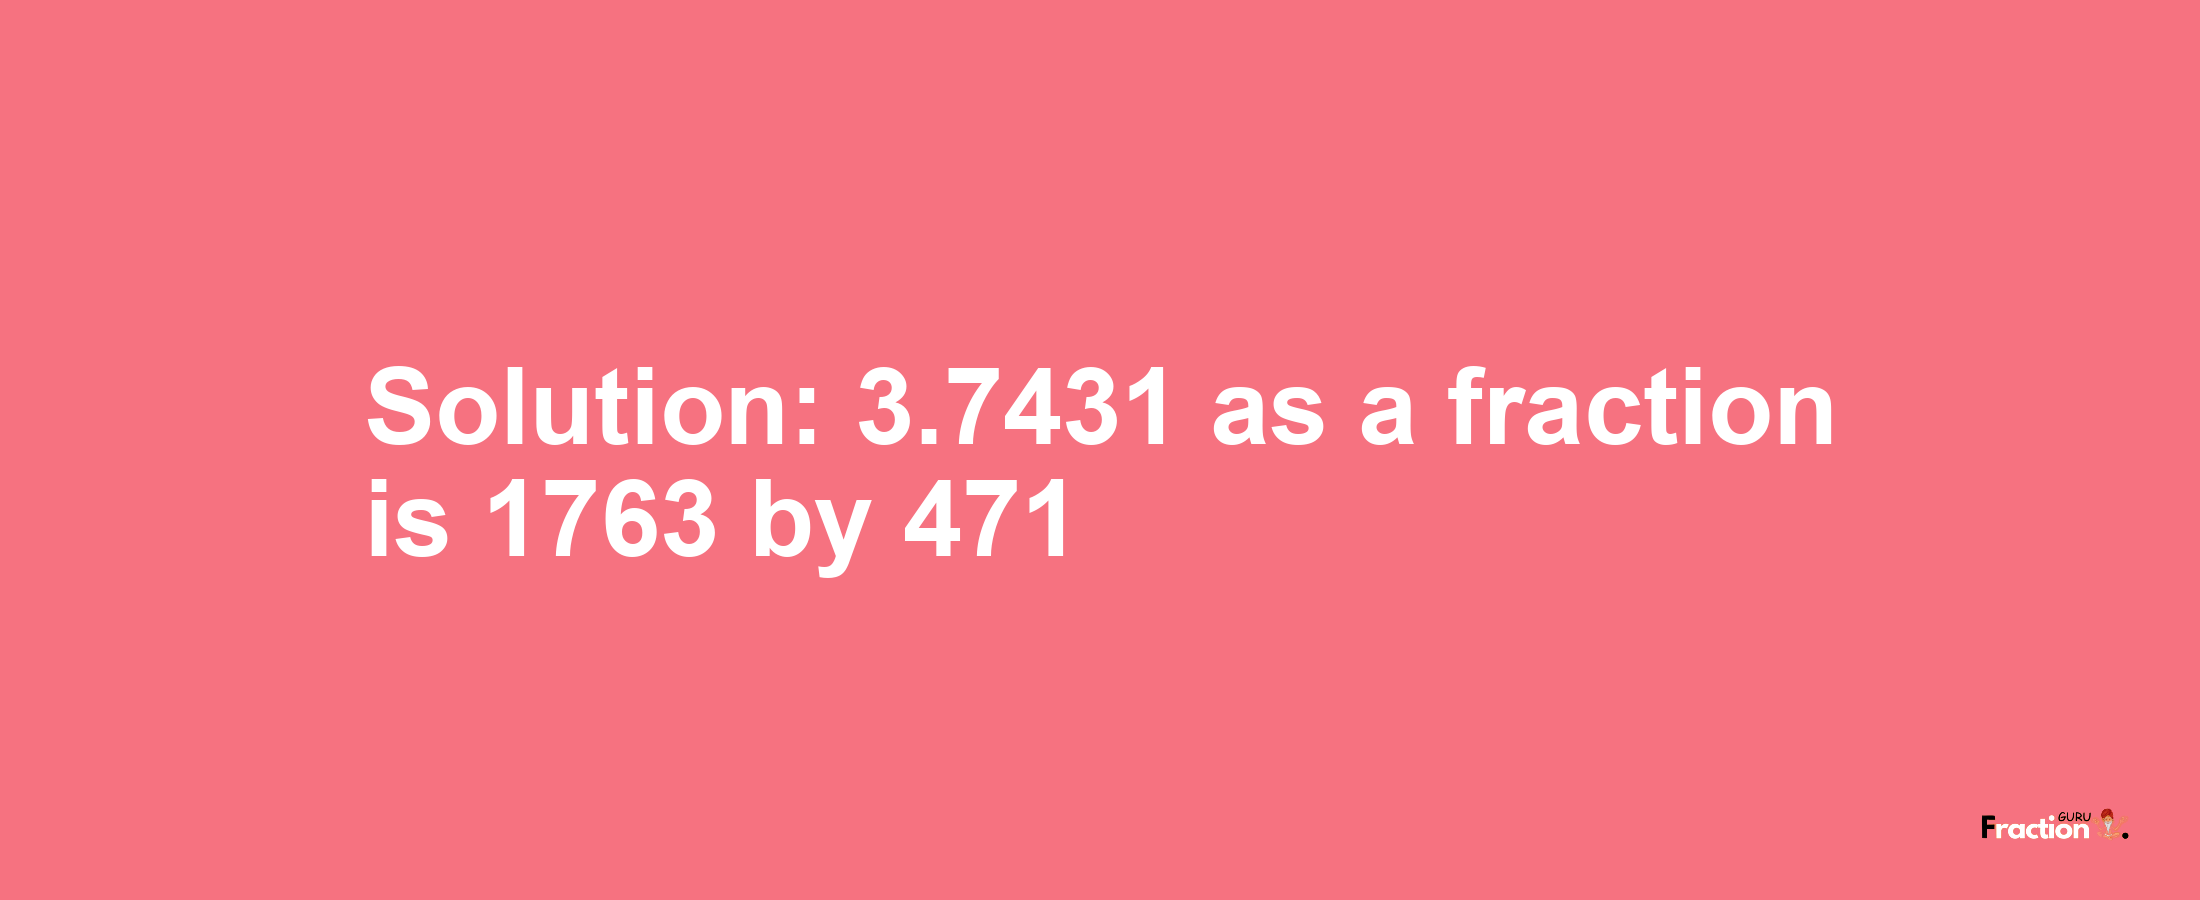 Solution:3.7431 as a fraction is 1763/471